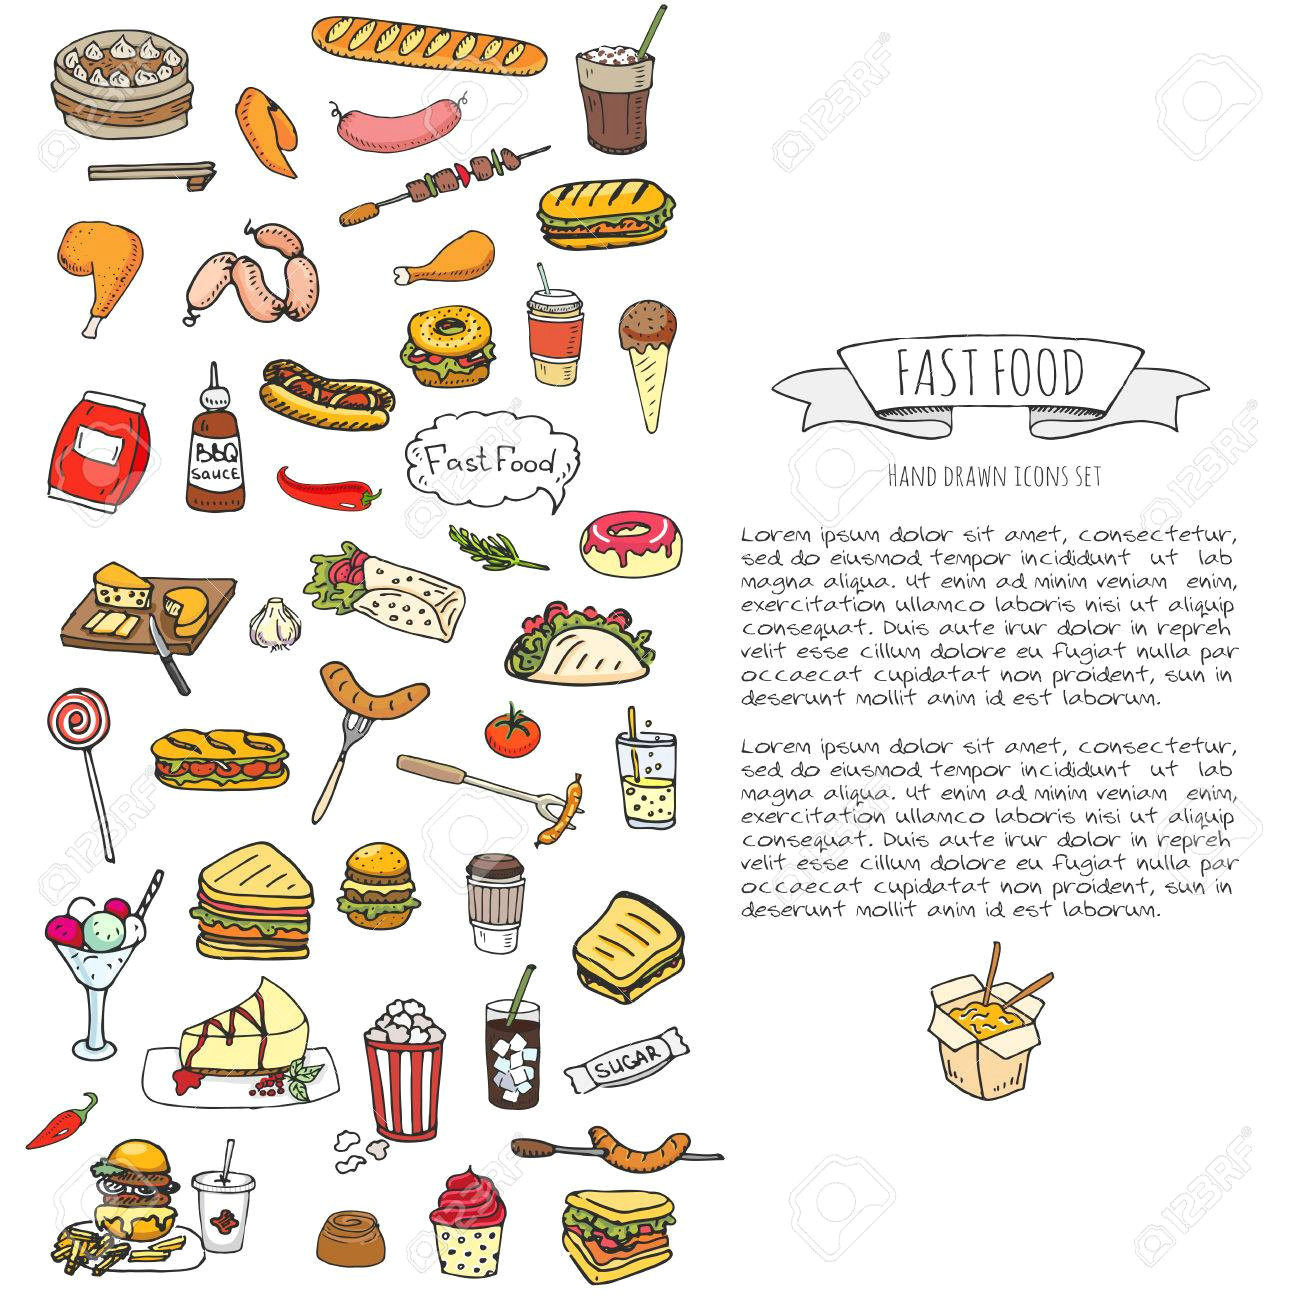 hand drawn doodle fast food icons set vector illustration junk food elements collection